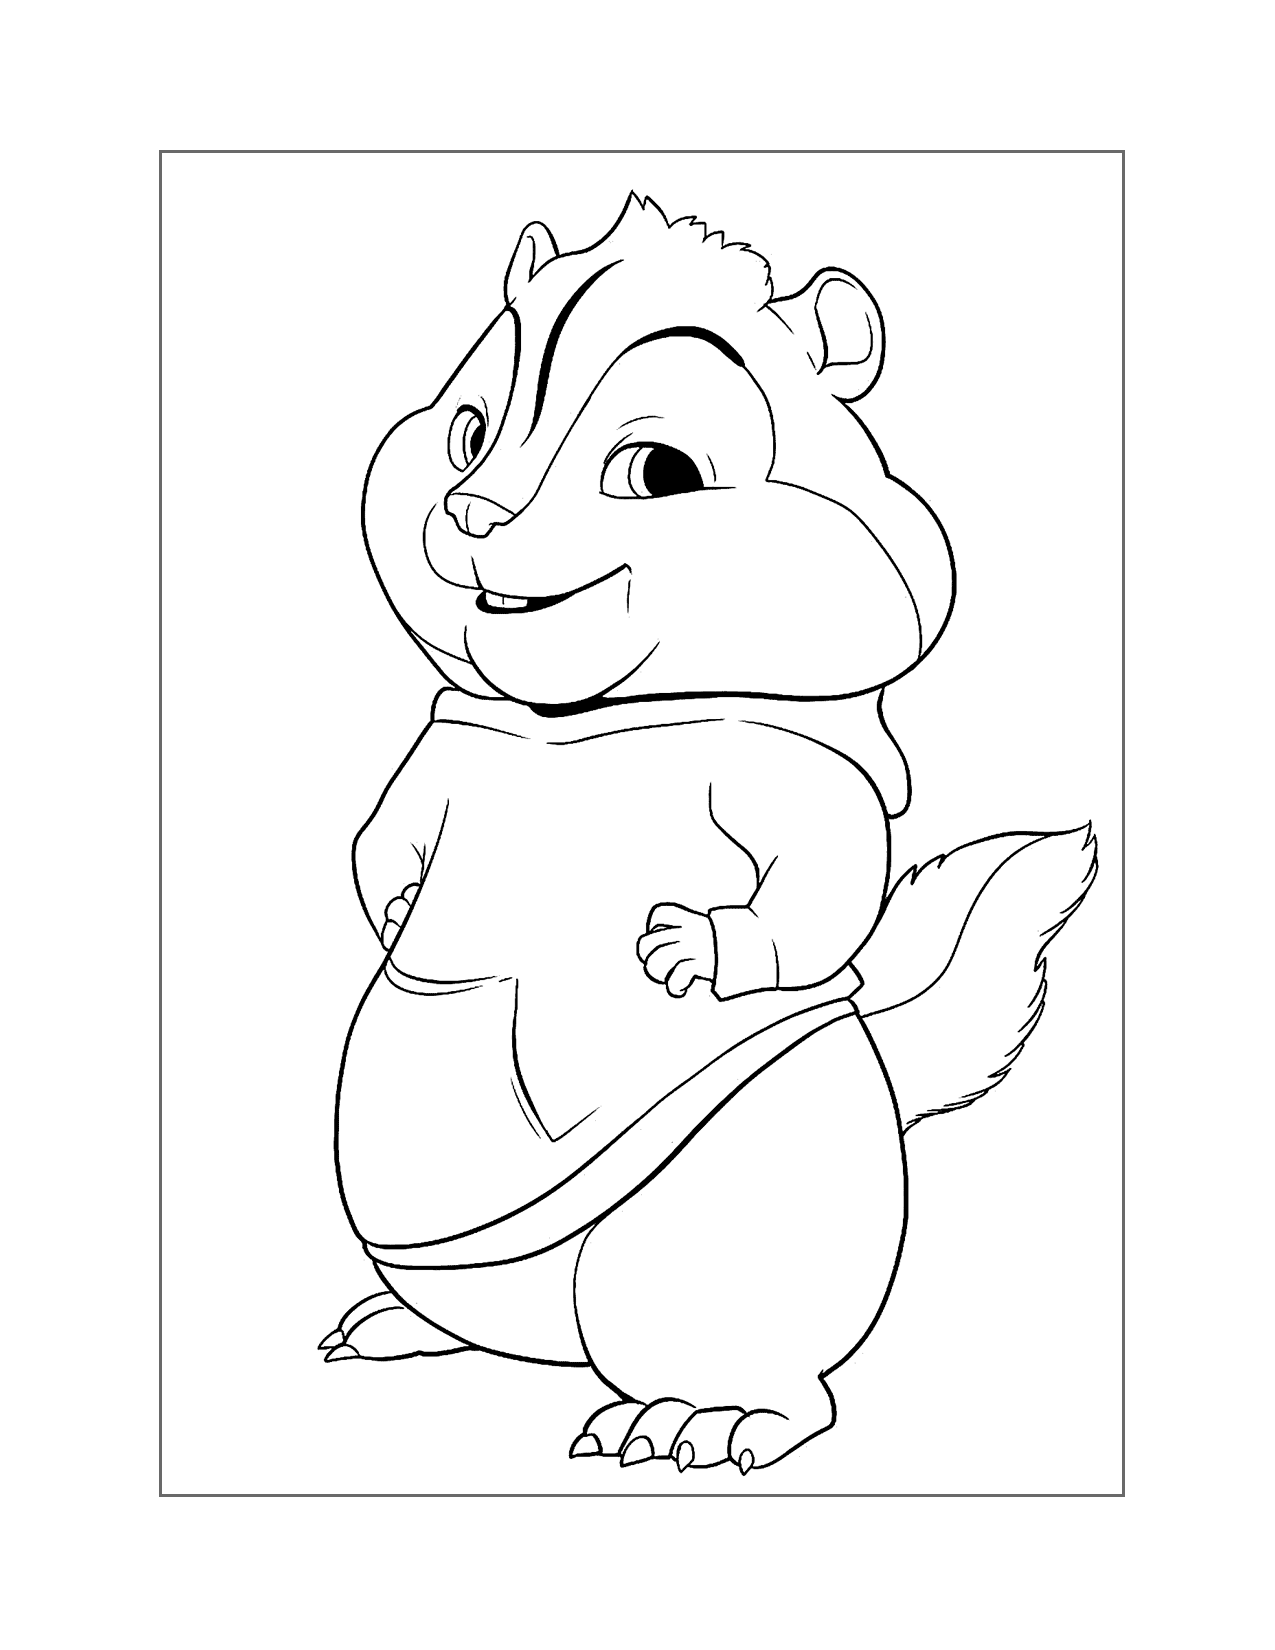 Theodore Chipmunks Coloring Pages